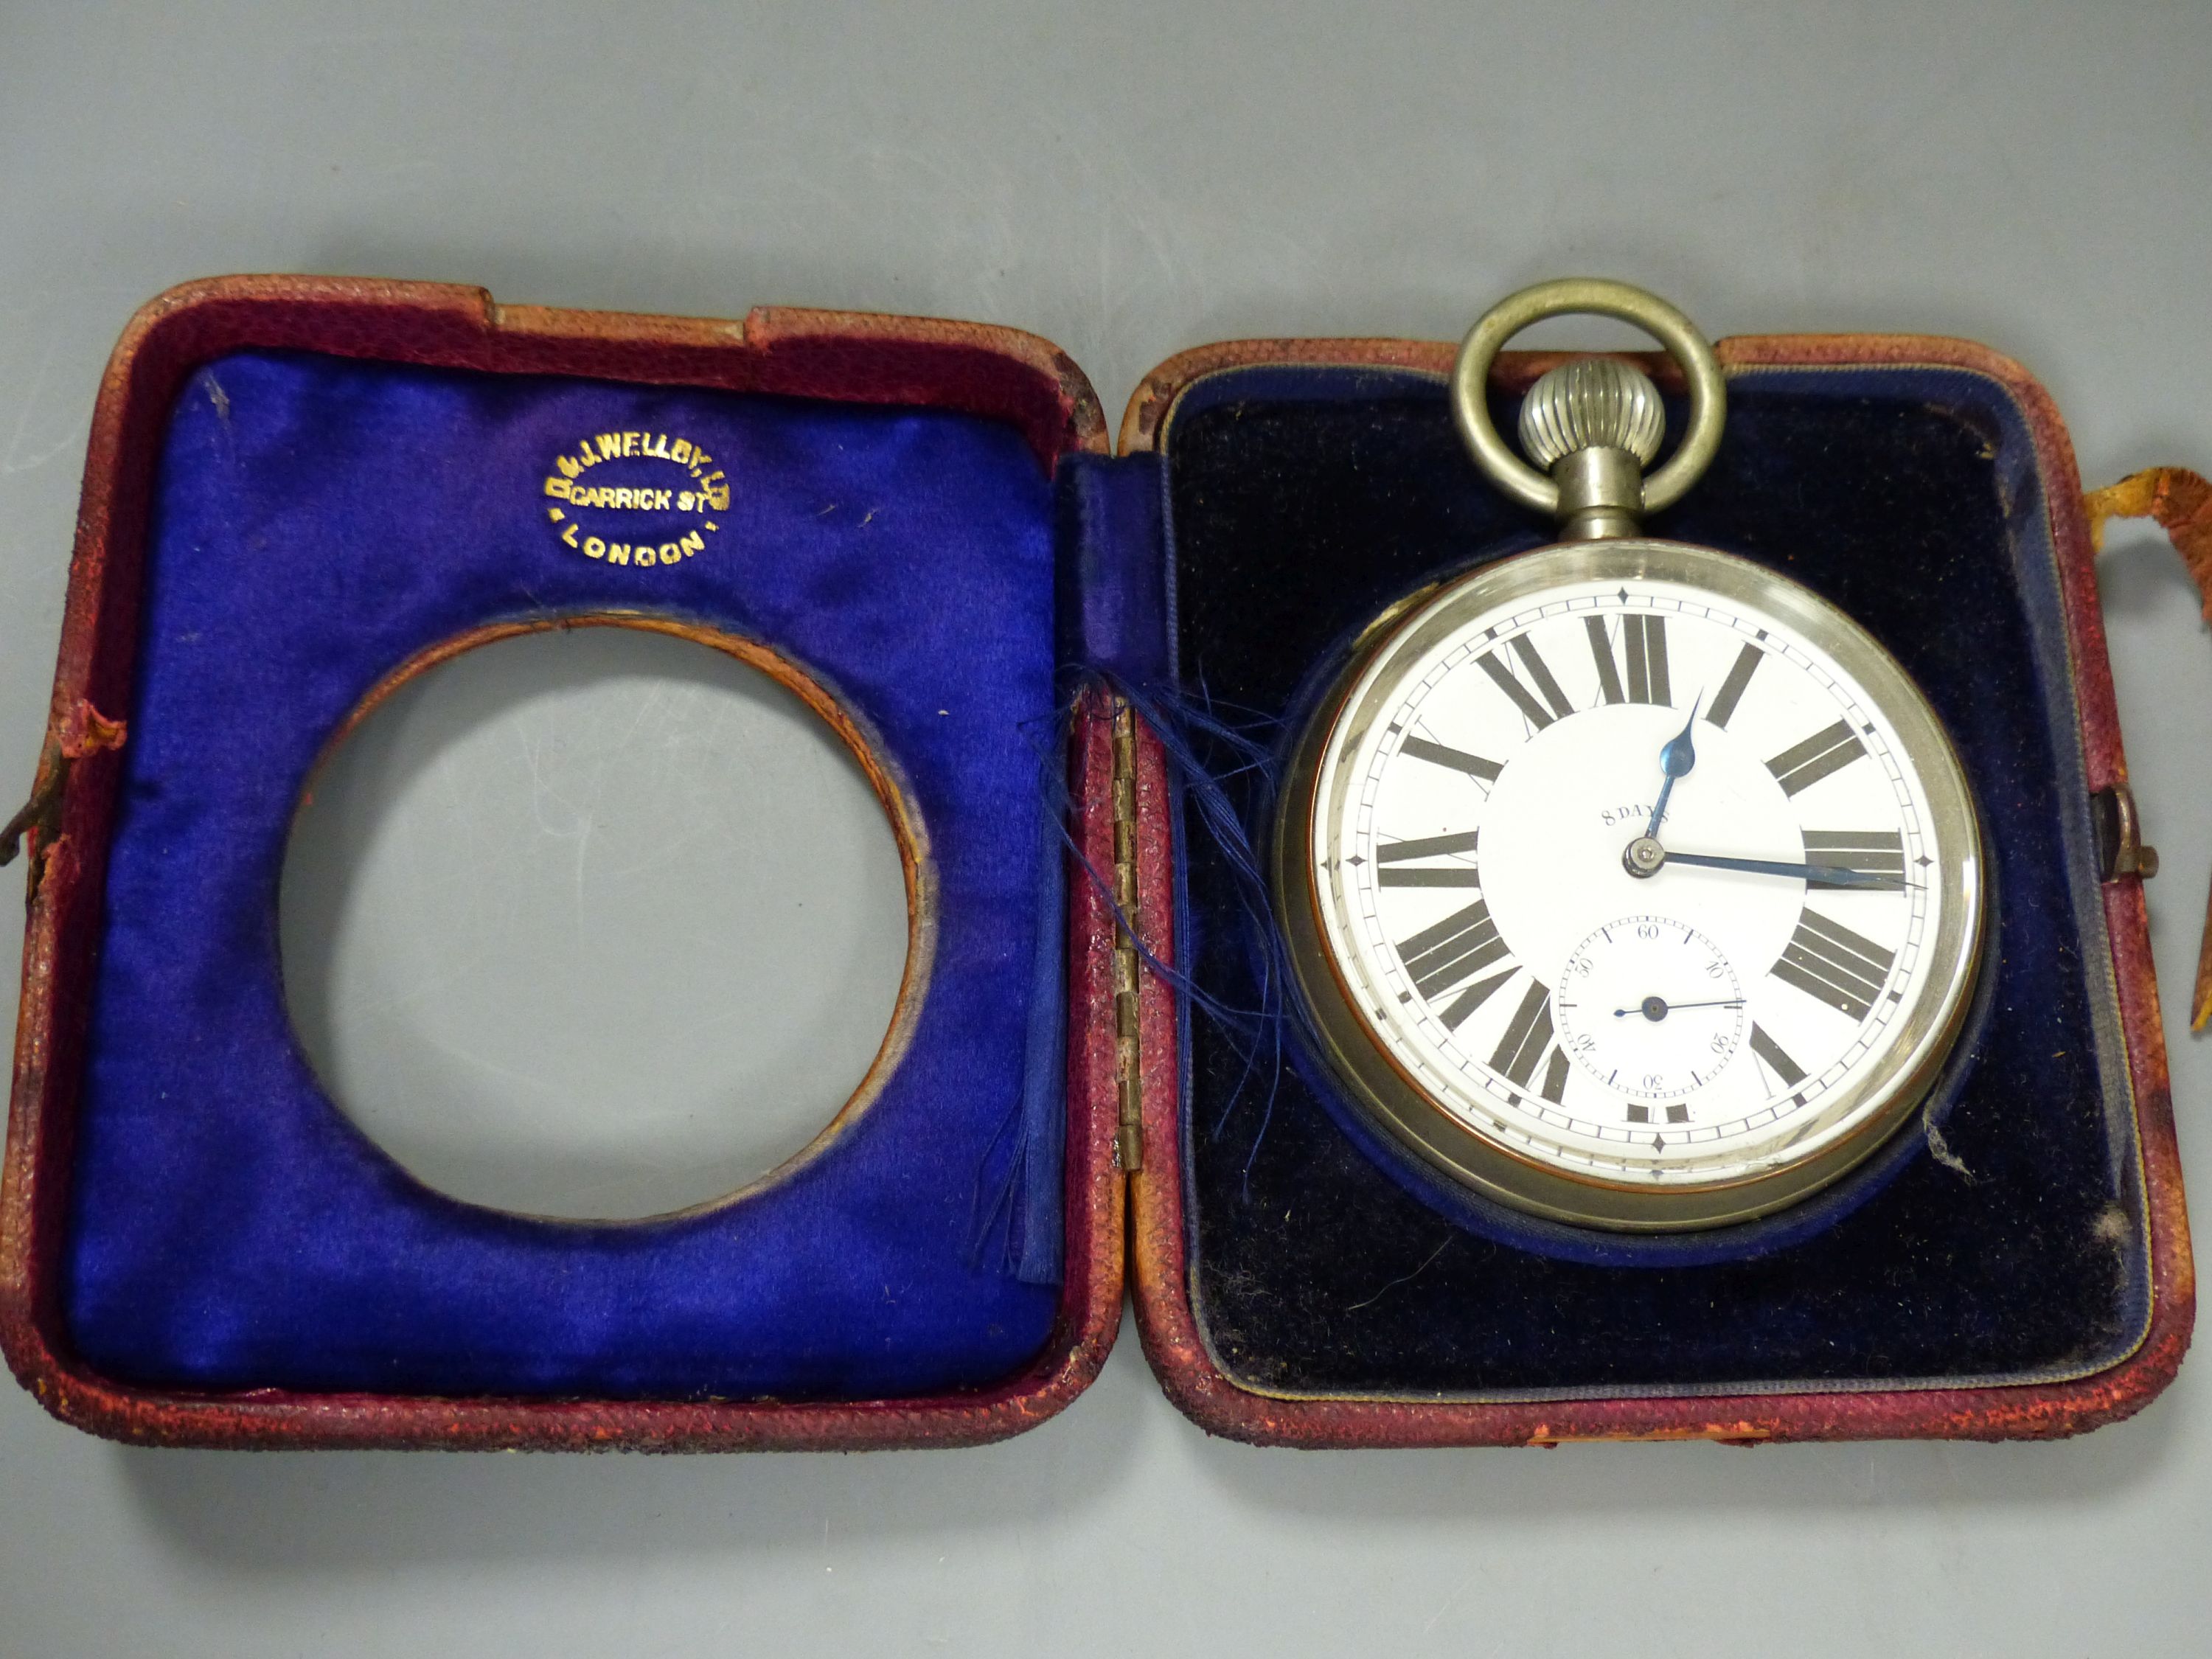 A G.A. Lenoir Wien Holosteric barometer and a cased Goliath eight day pocket watch